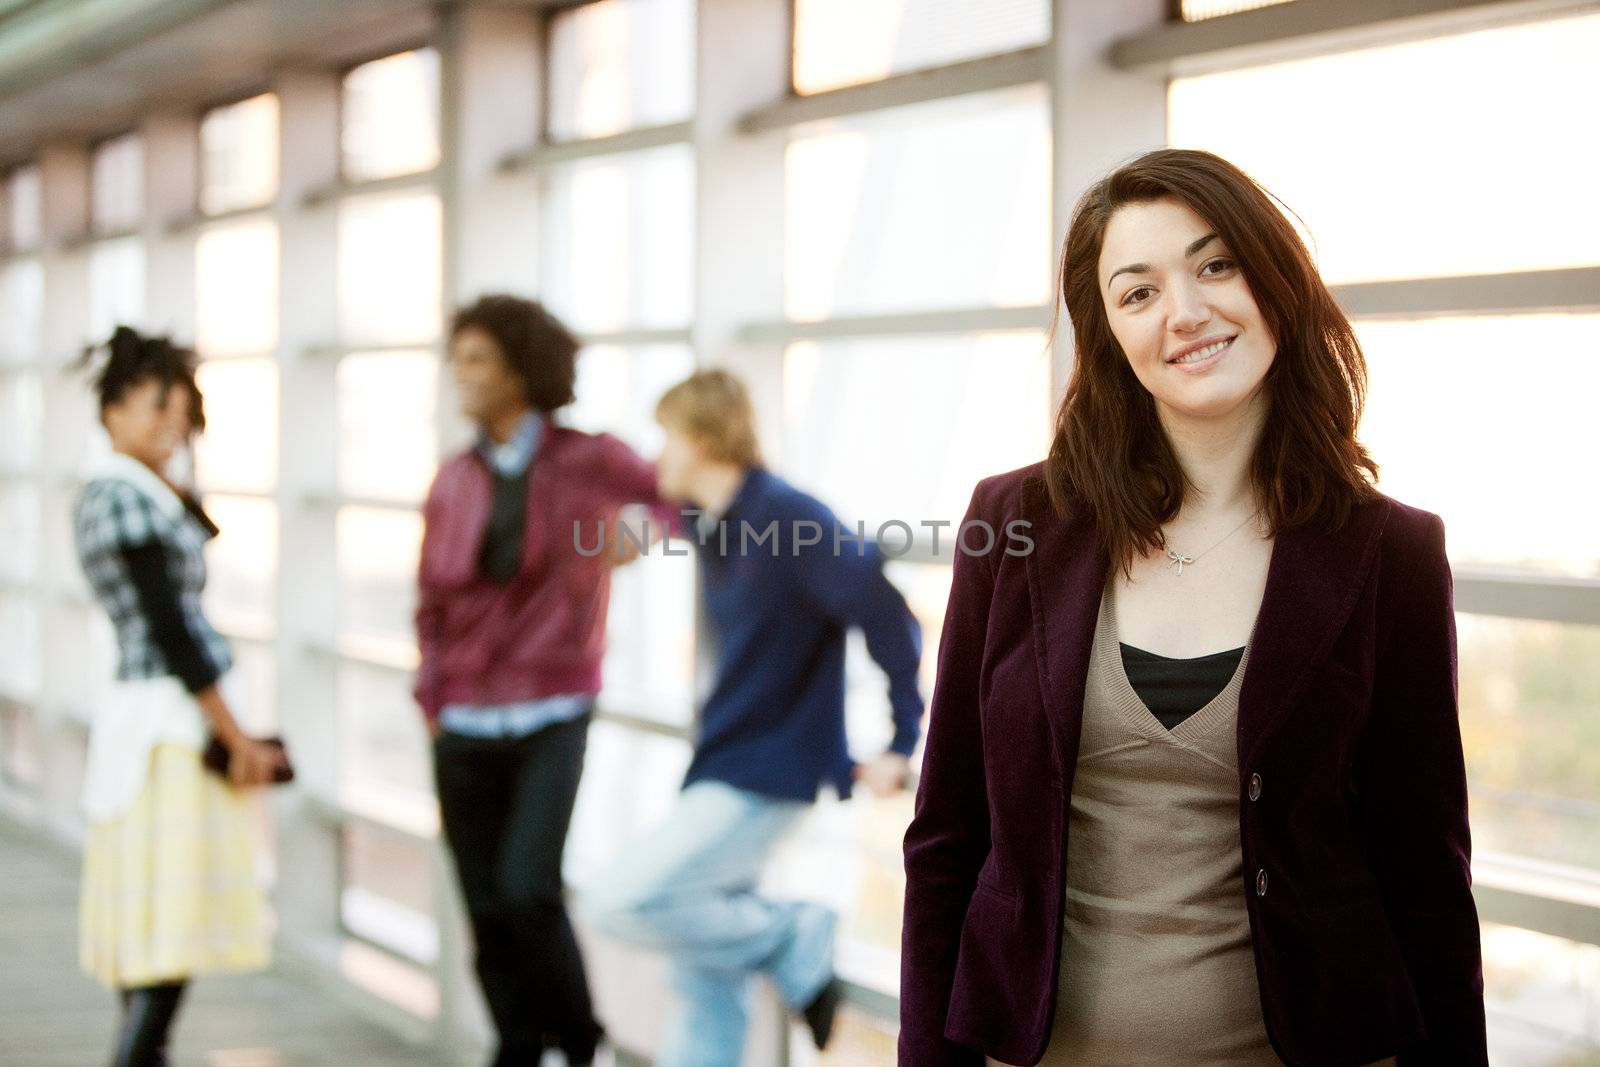 A portrait of a young woman with friends in the background